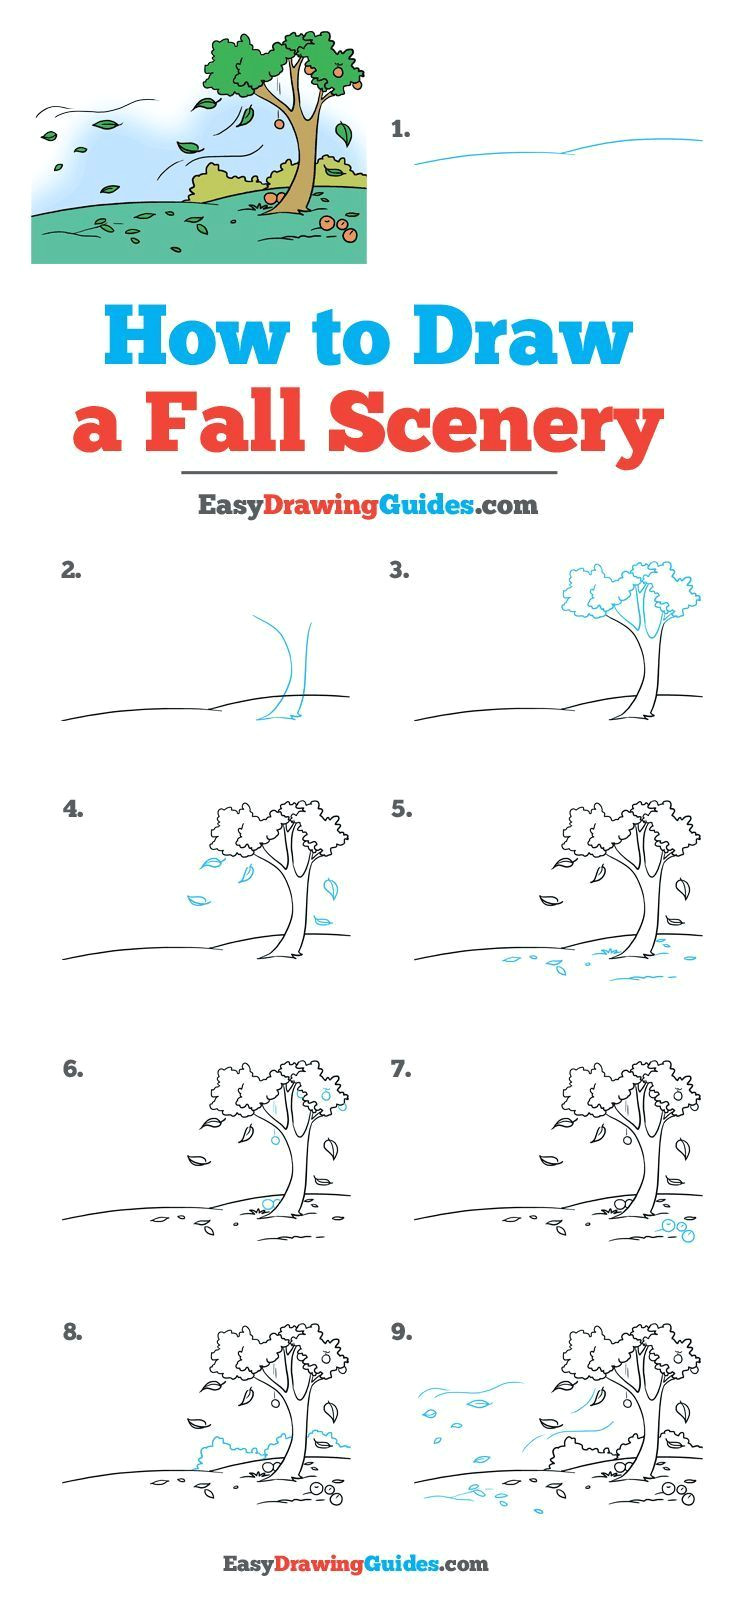 Easy Drawings Guides How to Draw Fall Scenery Really Easy Drawing Tutorial Rock Egg